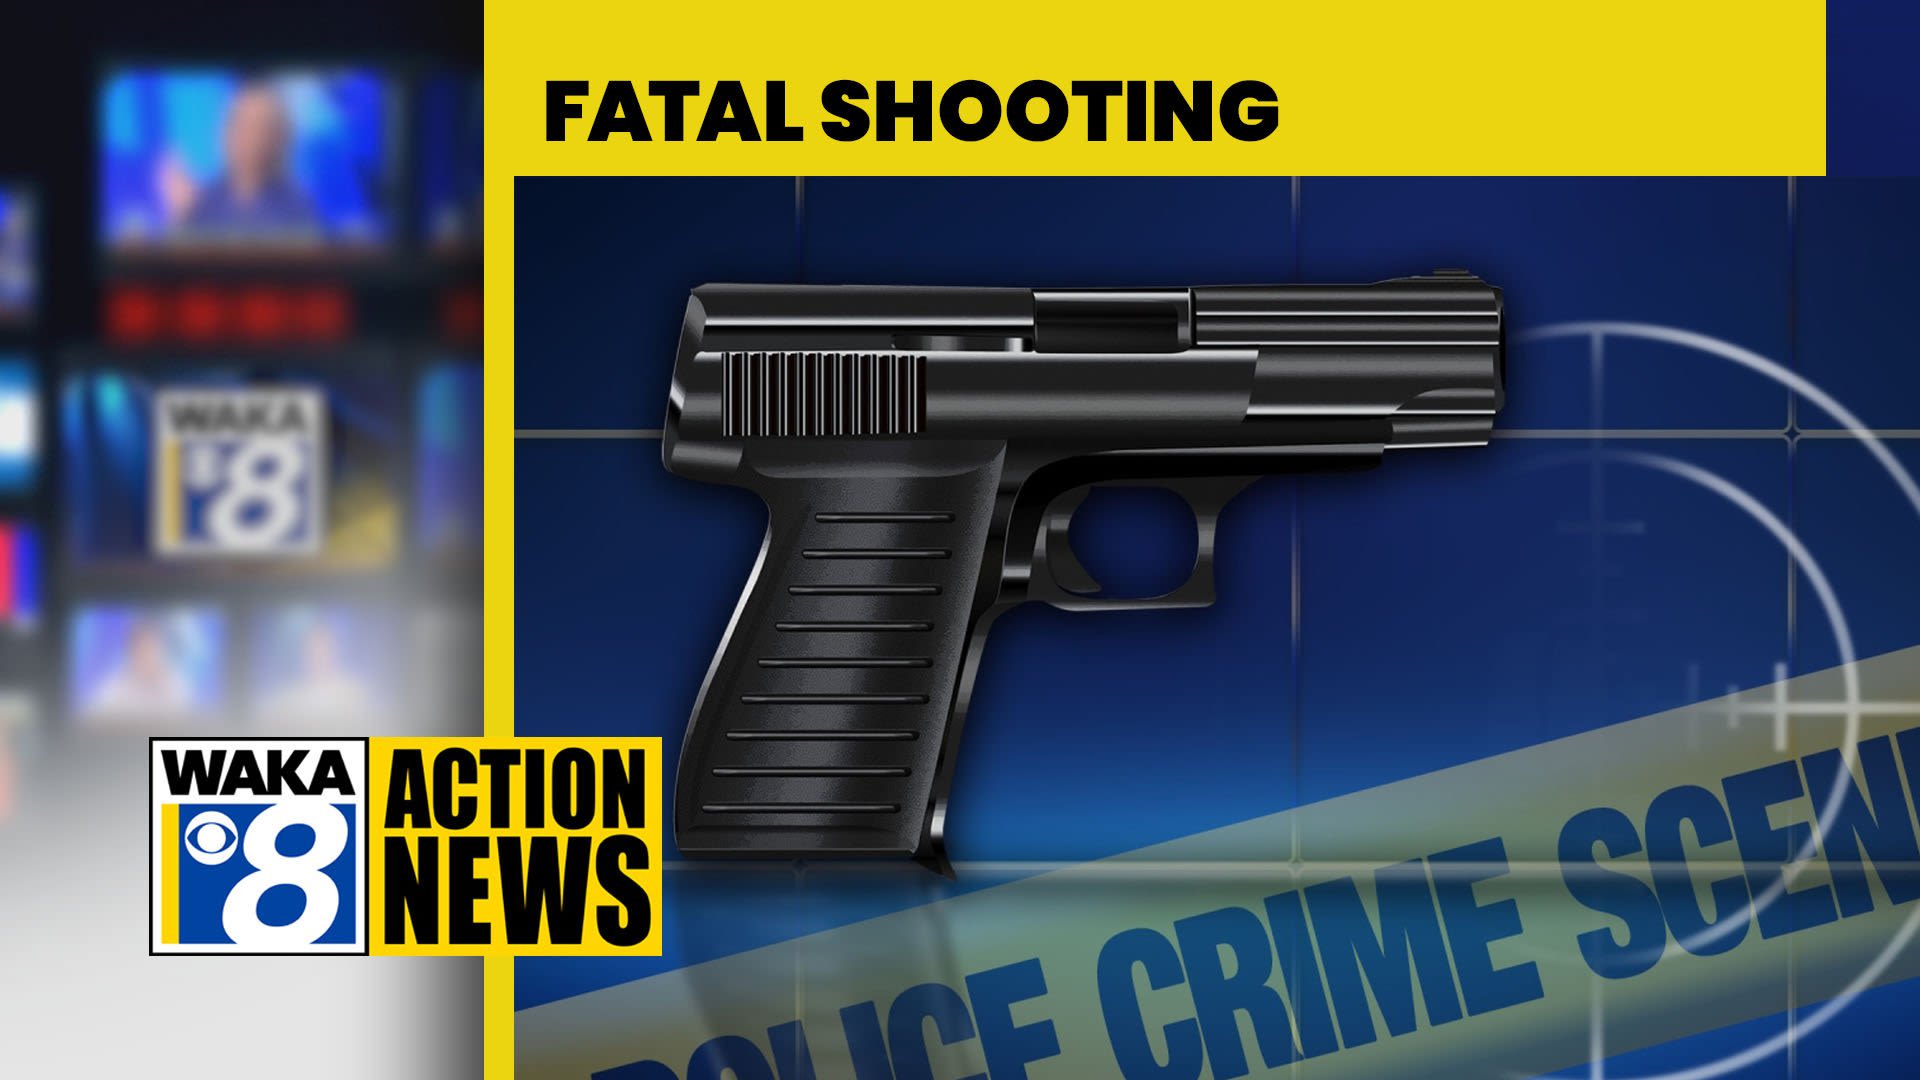 ACTION 8 UPDATE: Montgomery man dies after being shot on East Patton Avenue - WAKA 8